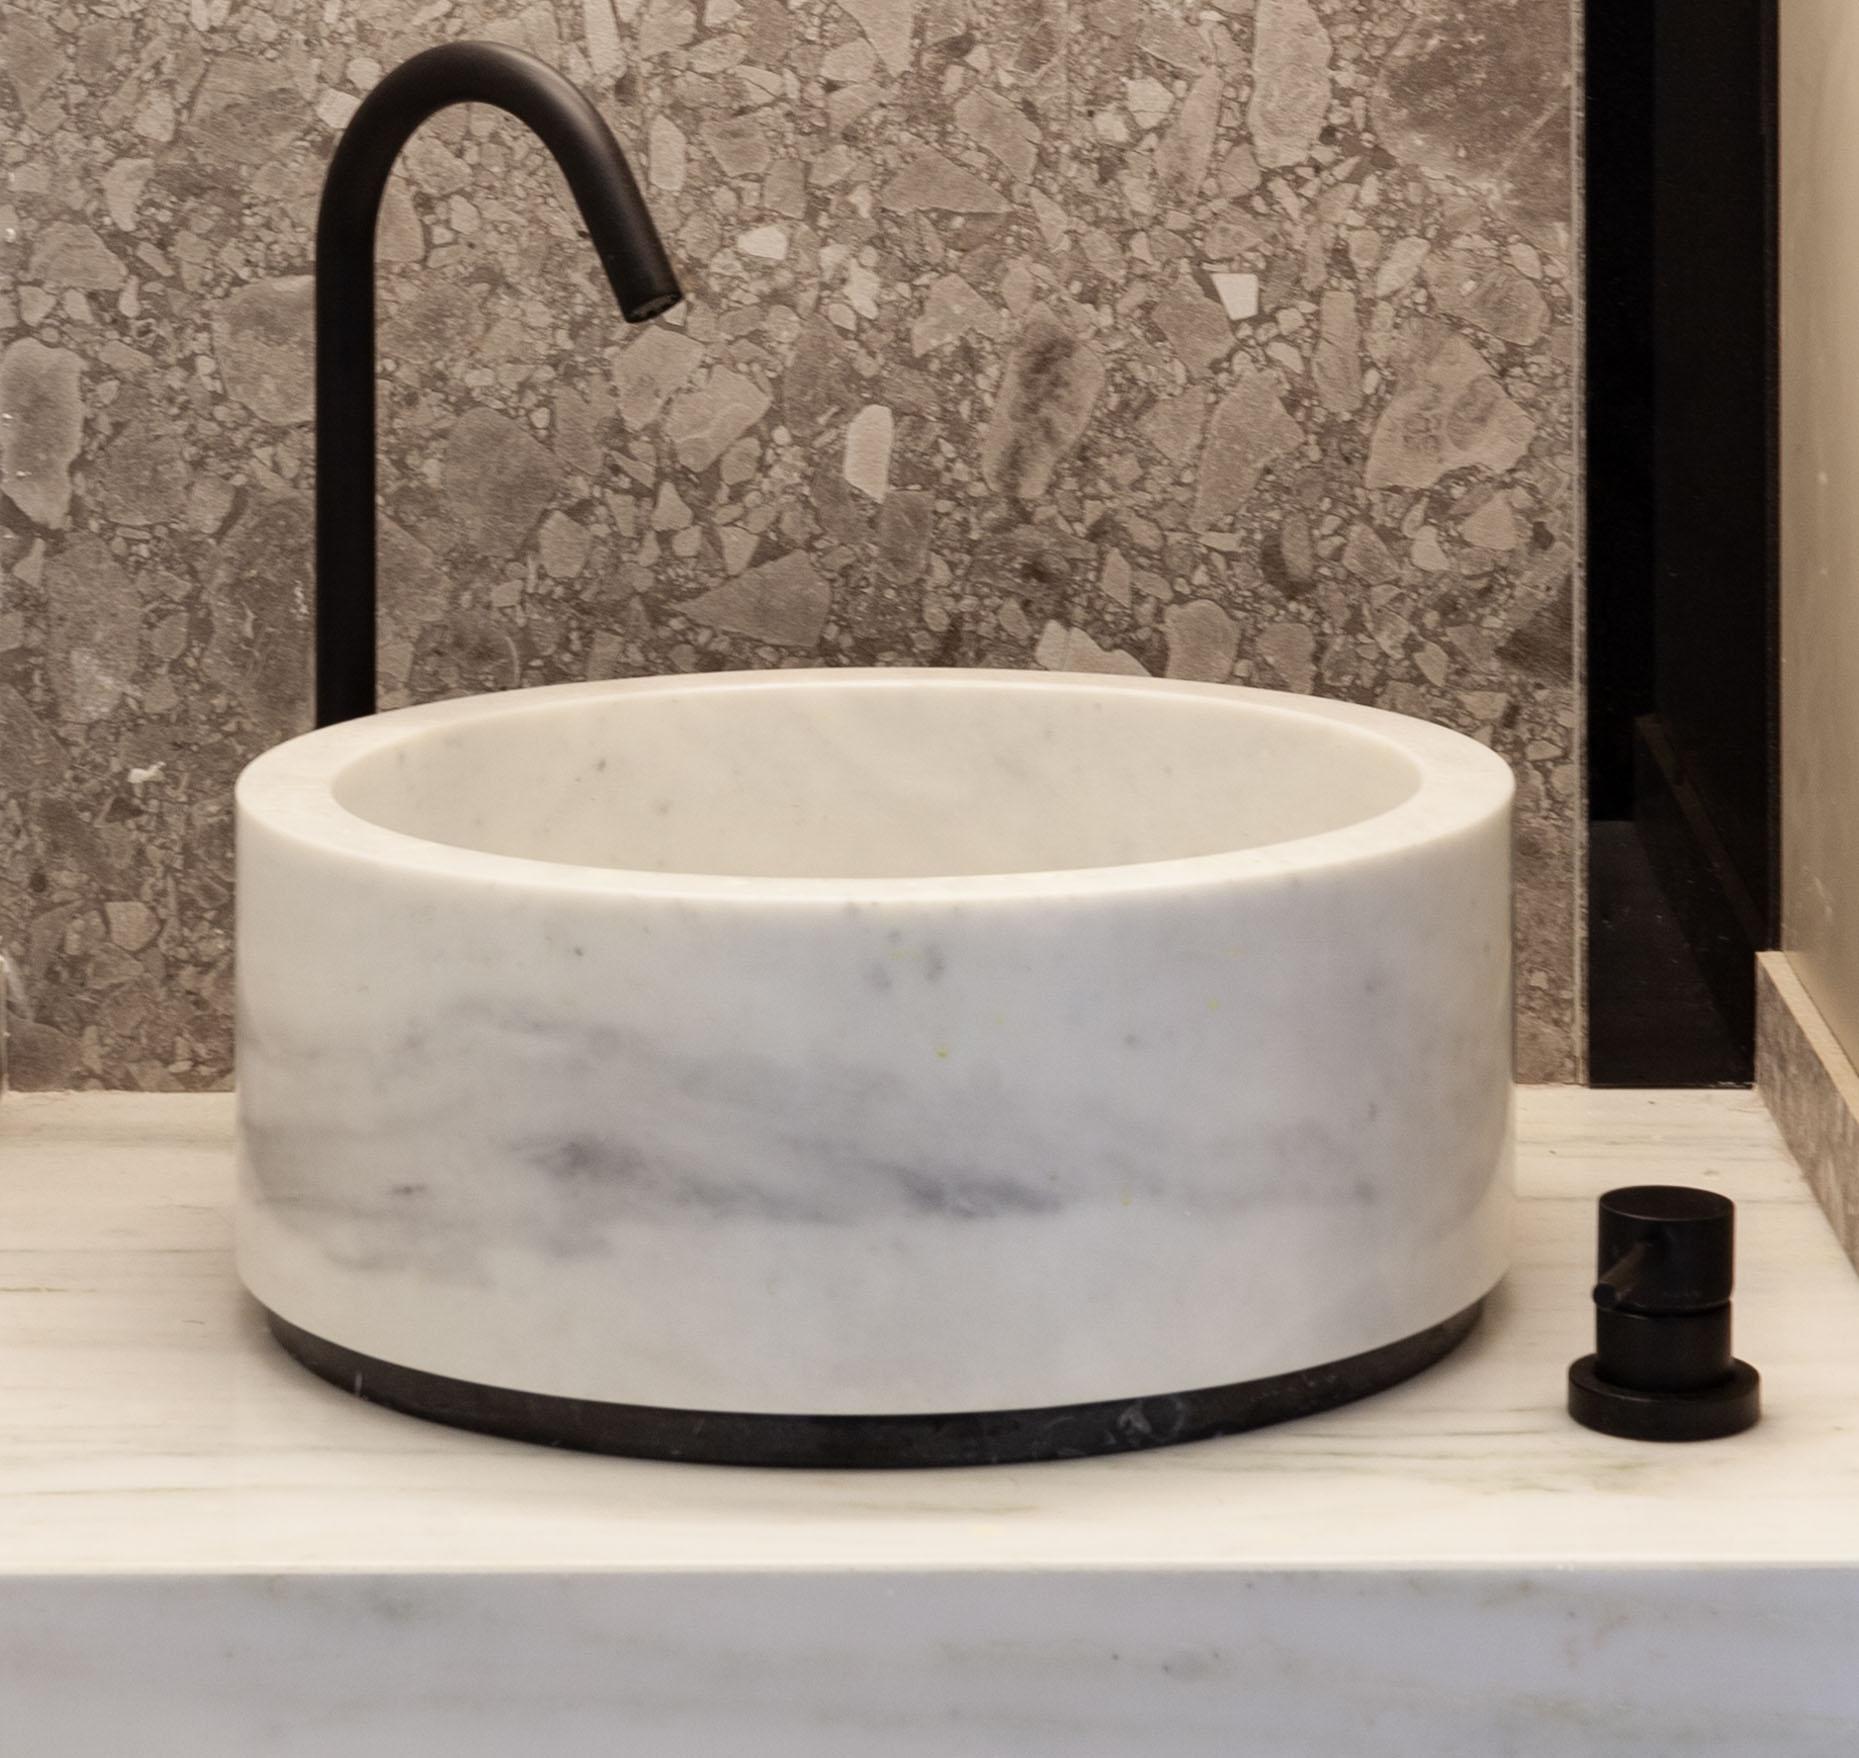 Greek B&W Basin from White and Black Marble in Circular Shape